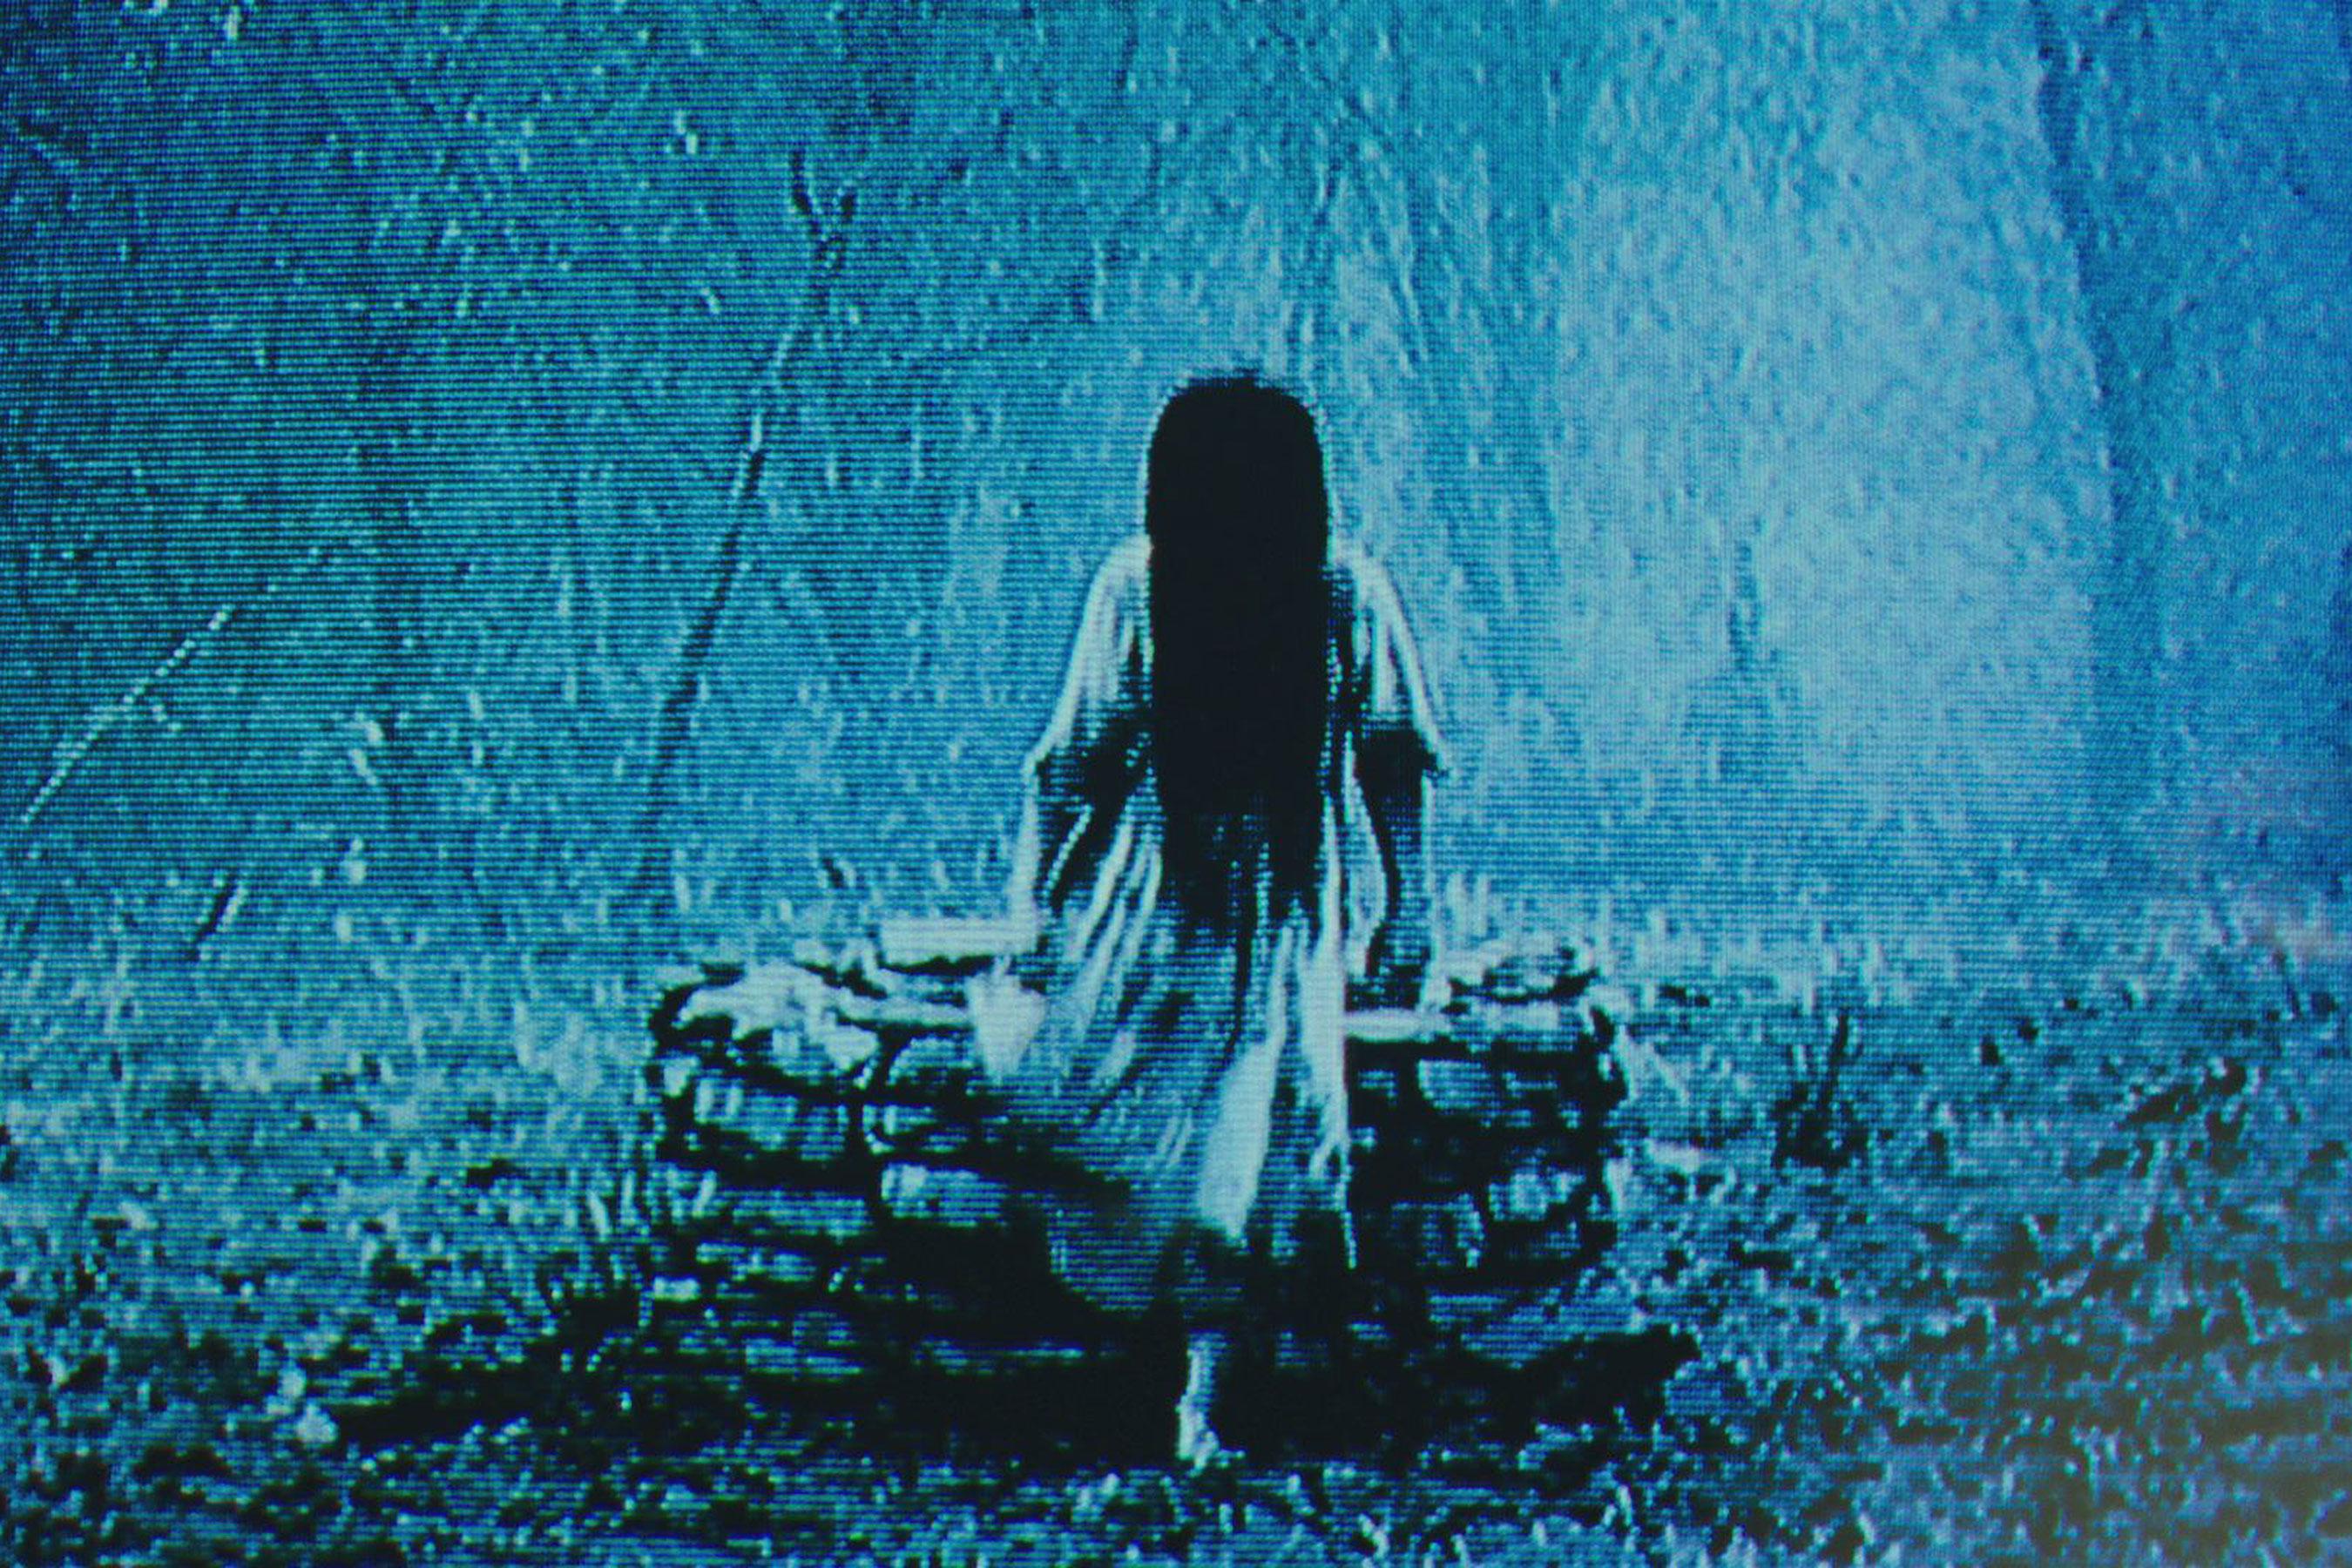 A grainy, blue-tinged image of a girl with long black hair covering her face. She wears a nightgown.